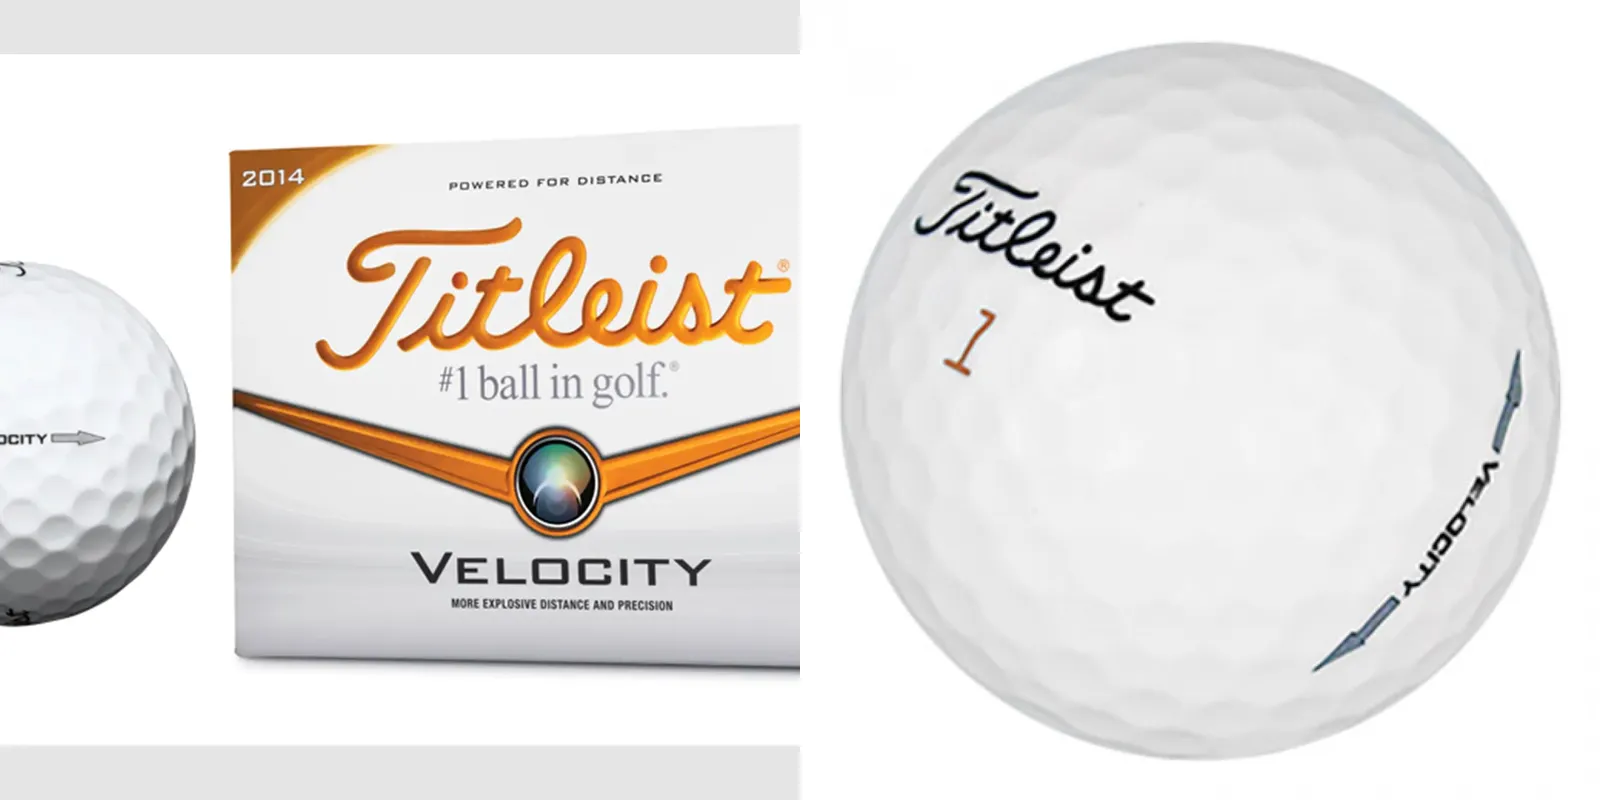 The introduction of Titleist Golf Ball Velocity